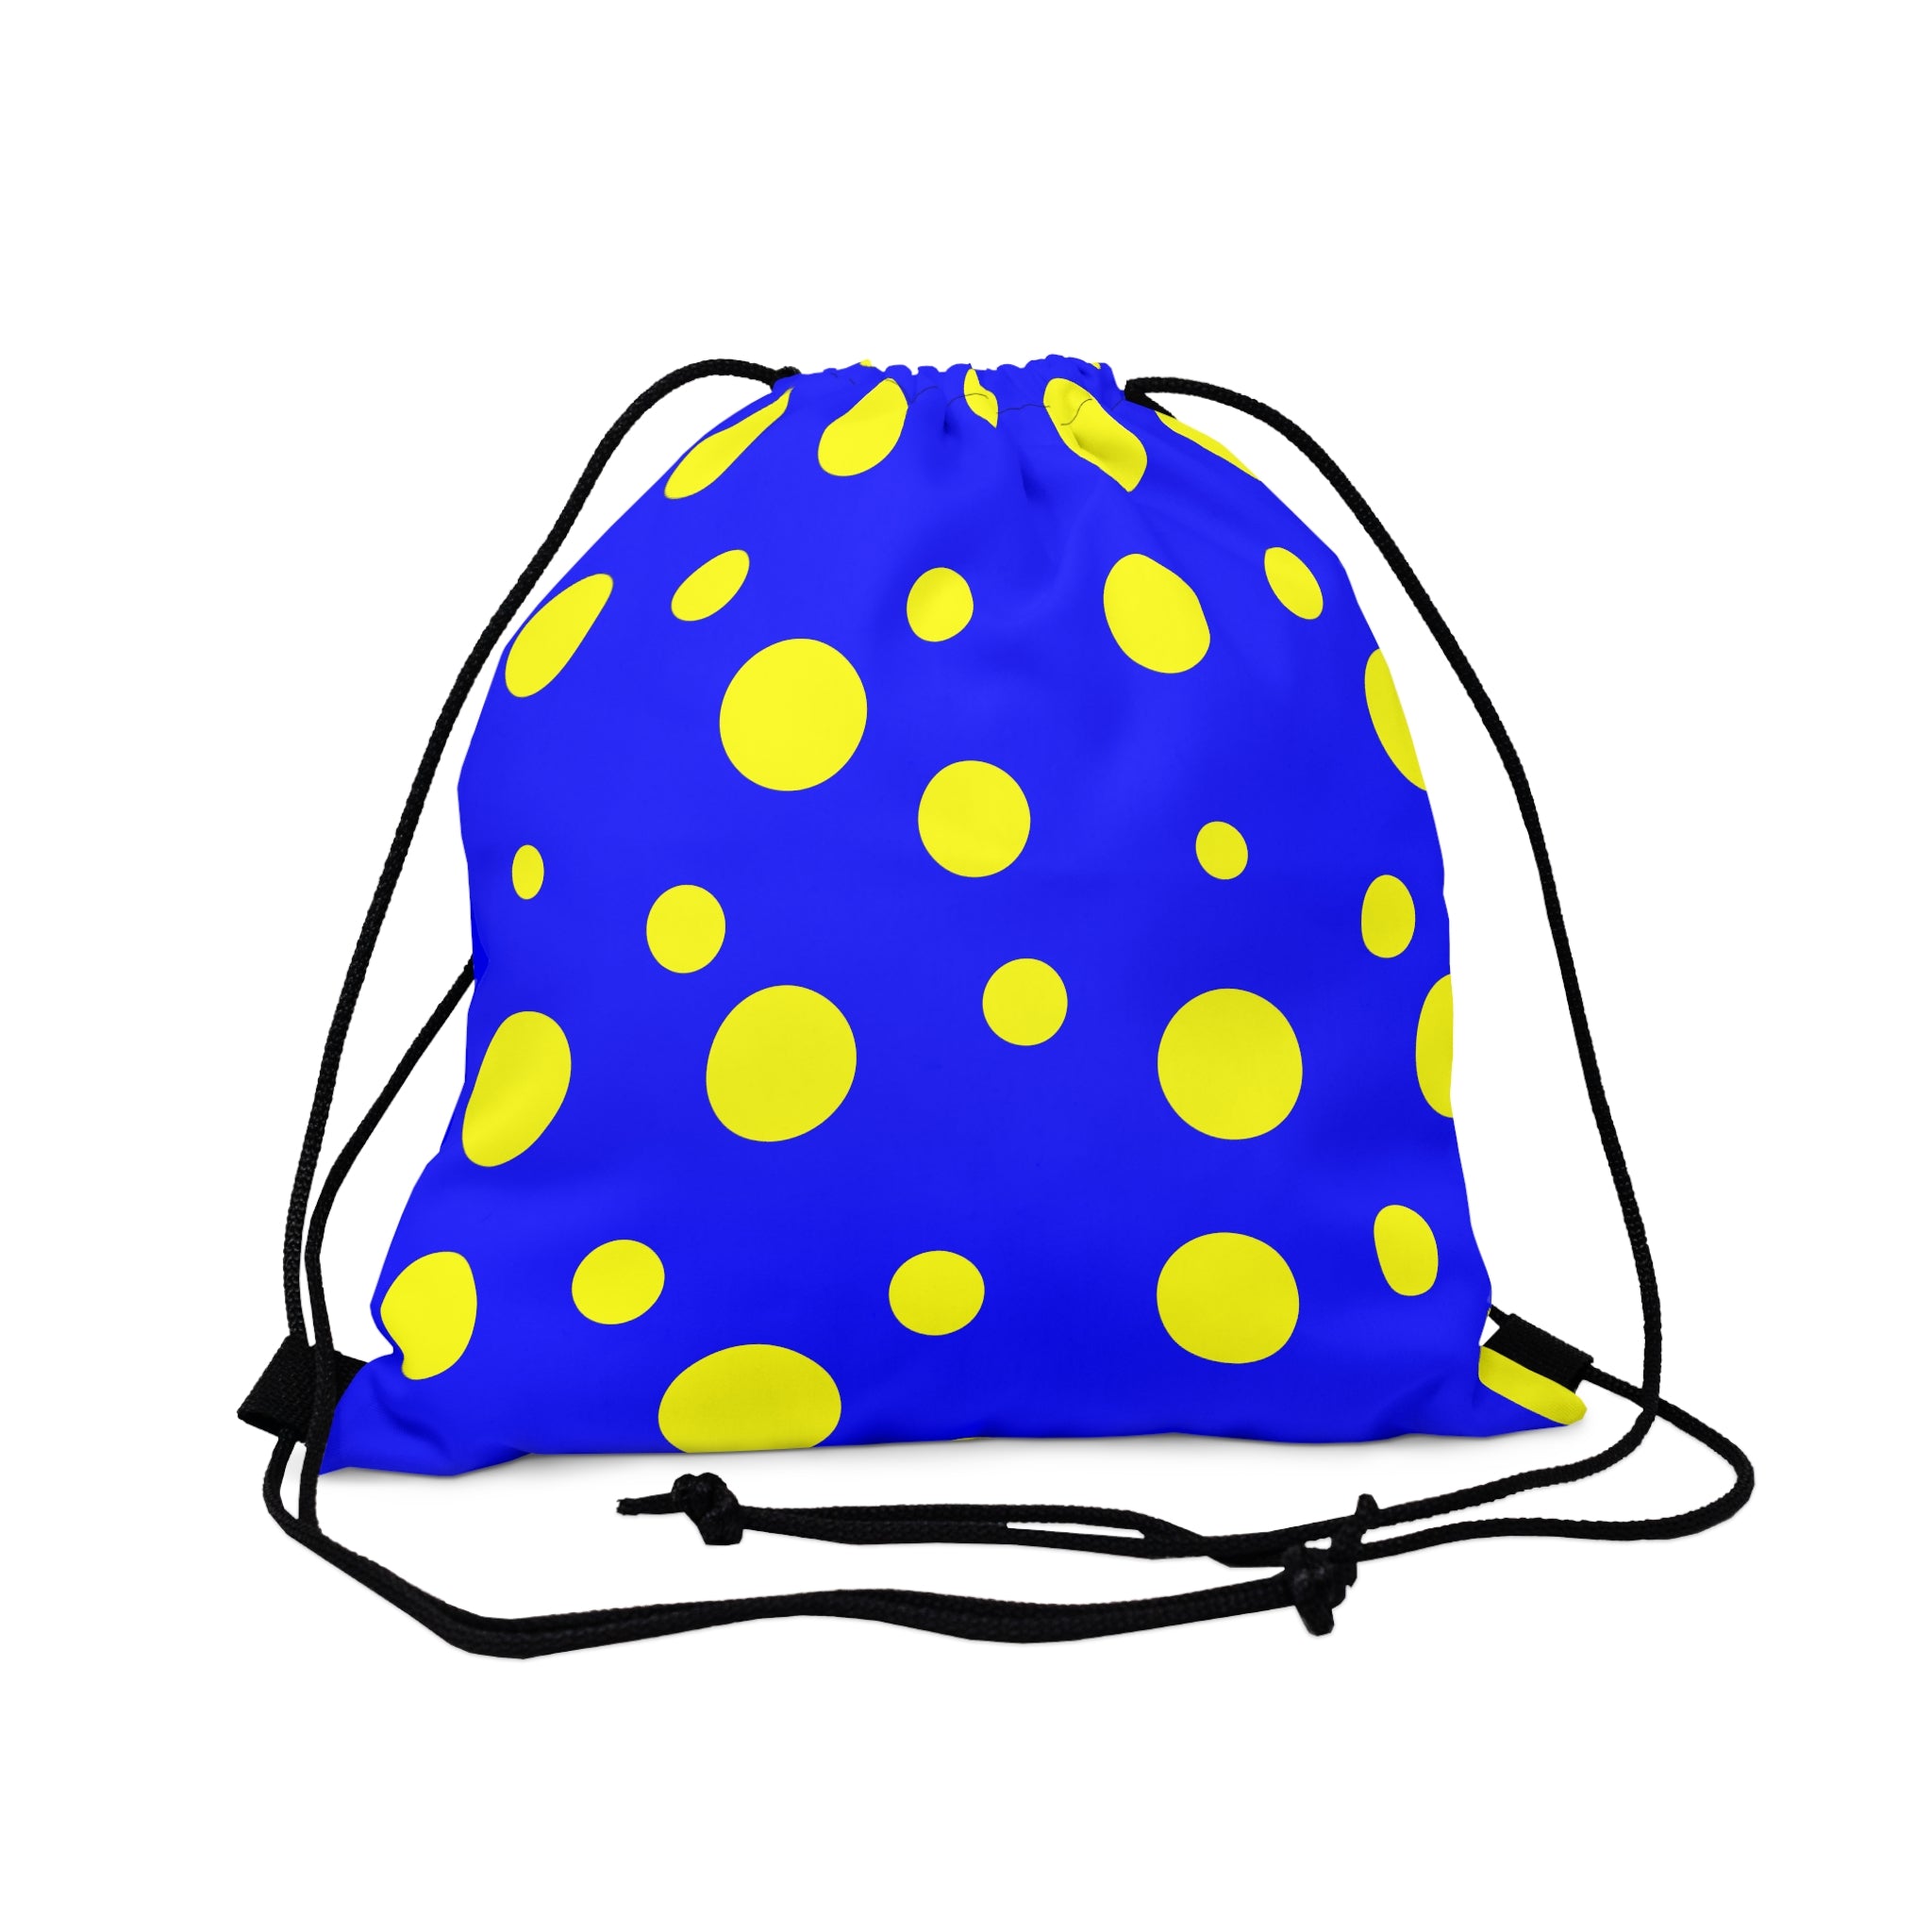 Blue drawstring bag with yellow spots